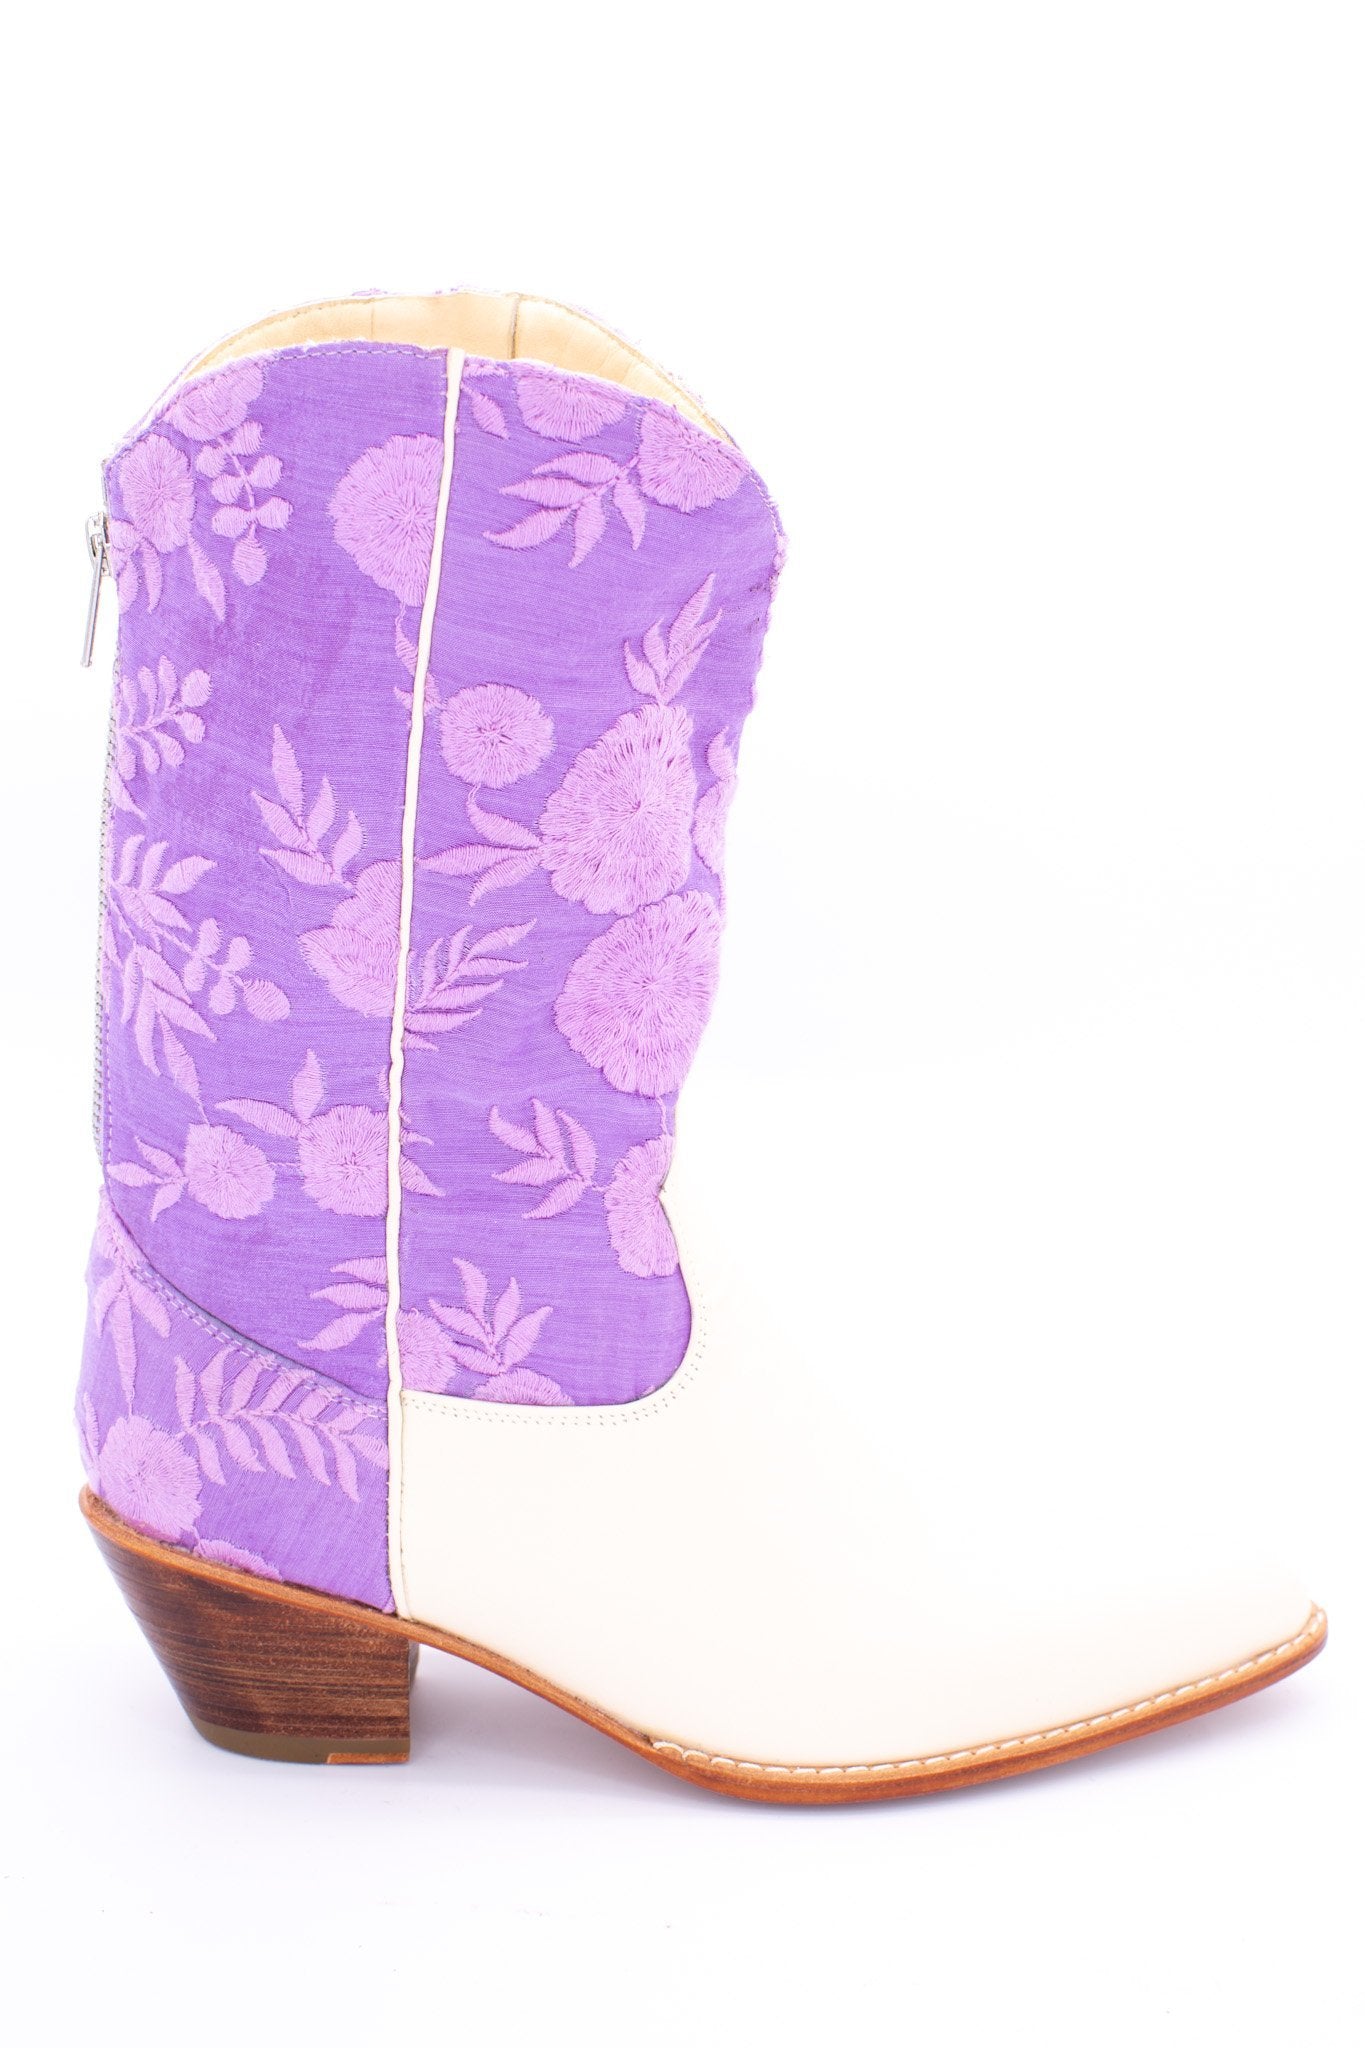 LAVENDER WESTERN BOOTS NANCY - sustainably made MOMO NEW YORK sustainable clothing, boots slow fashion